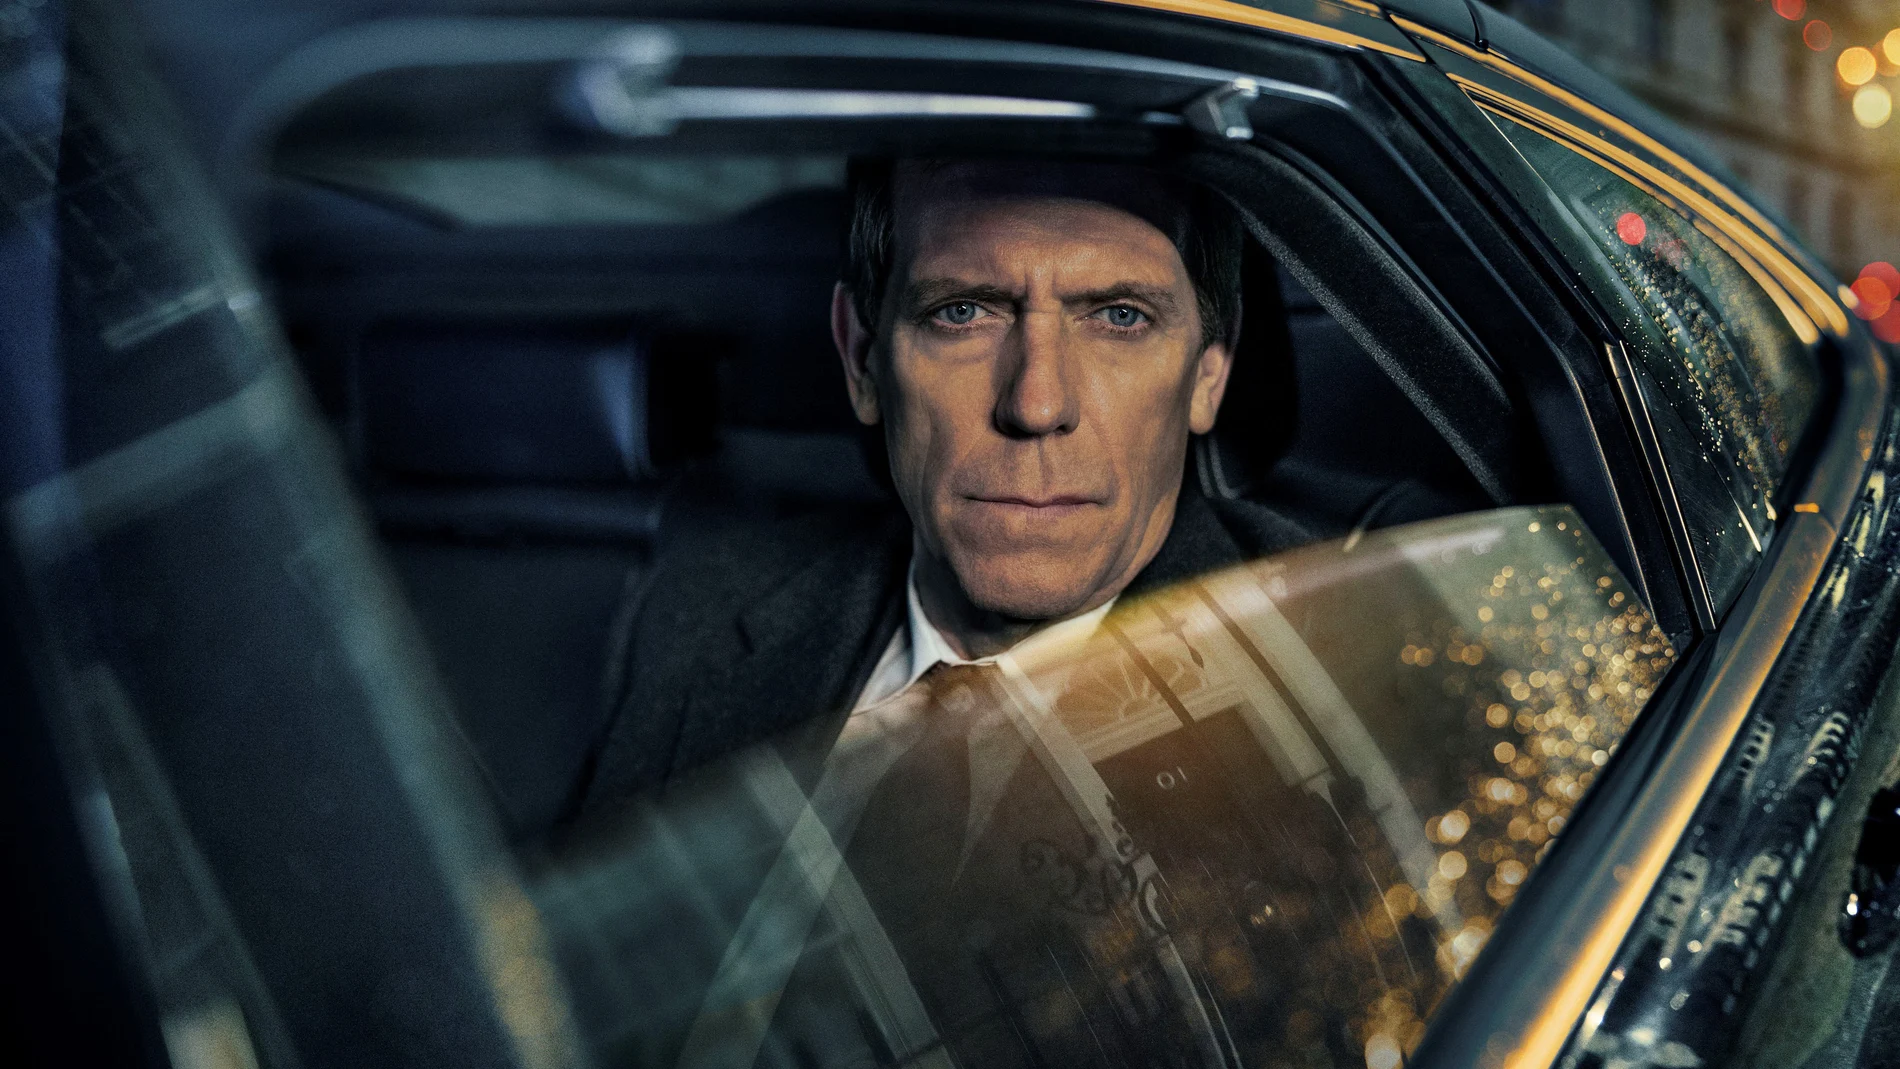 This image released by PBS shows Hugh Laurie as a heedless British politician beset by scandal in the four-episode series "Roadkill," premiering on MASTERPIECE, Sunday, Nov. 1, 2020 on PBS. (MASTERPIECE/PBS via AP)